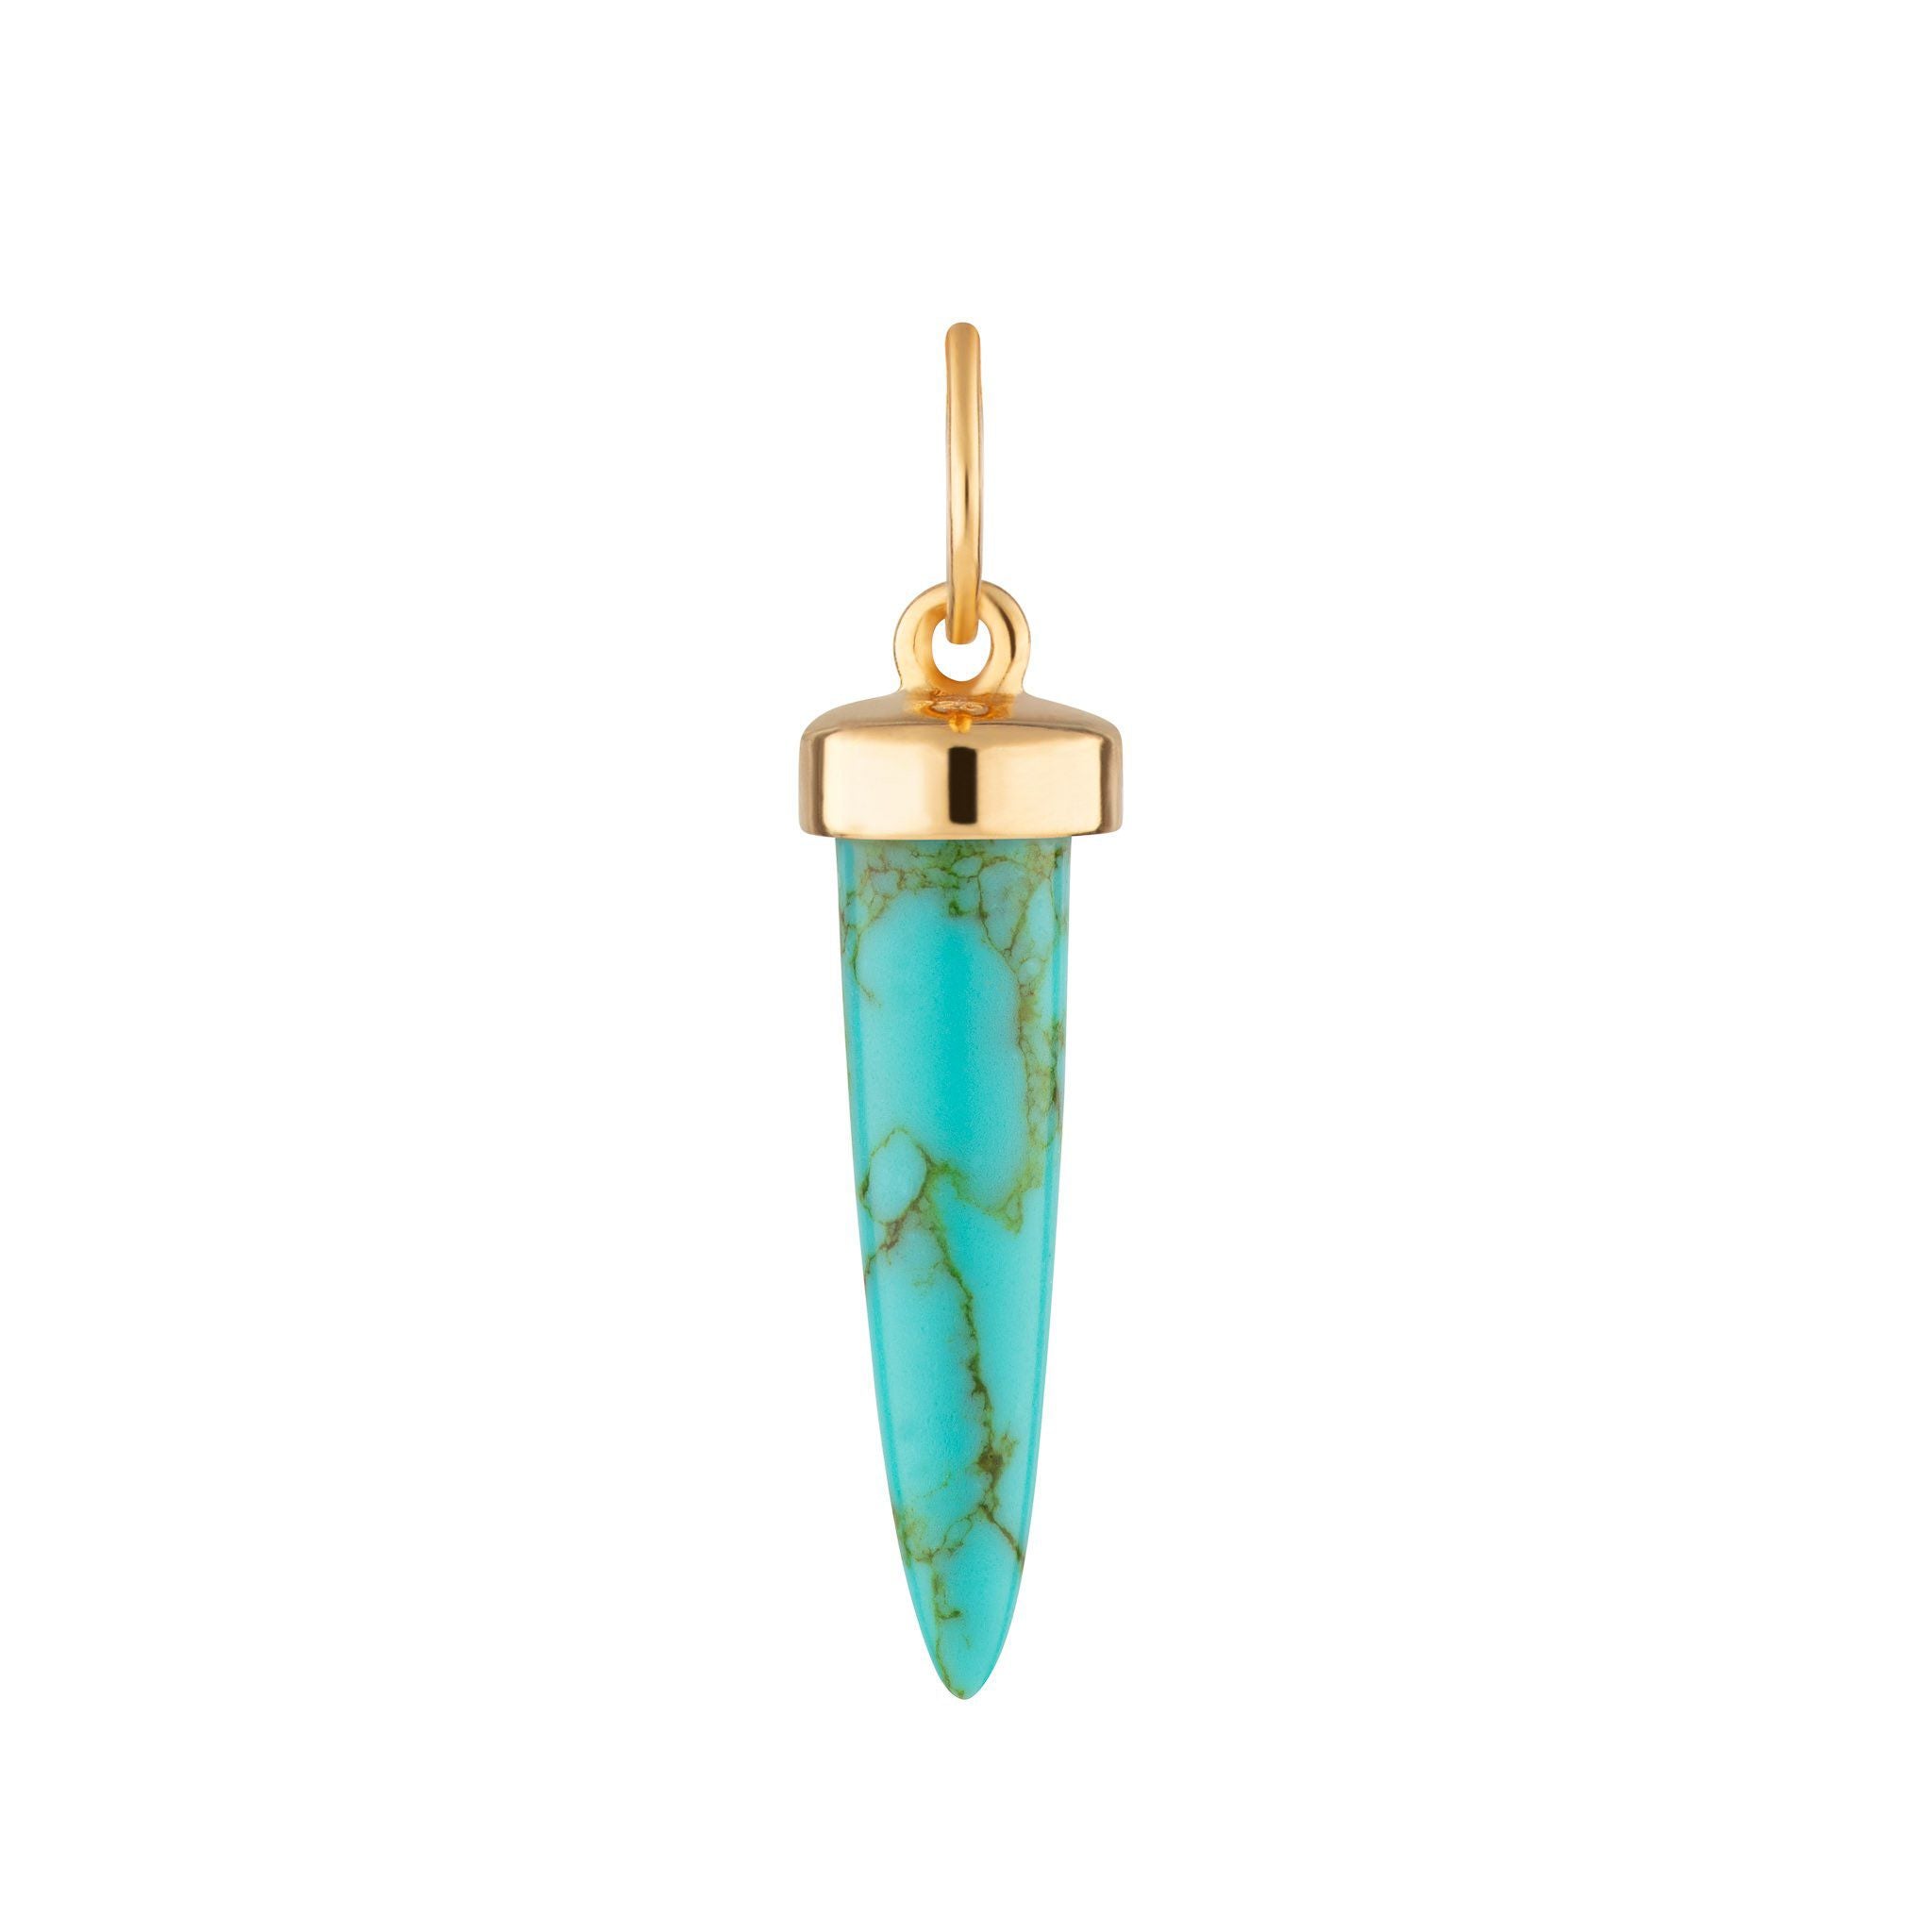  Turquoise Spike Charm - by Scream Pretty